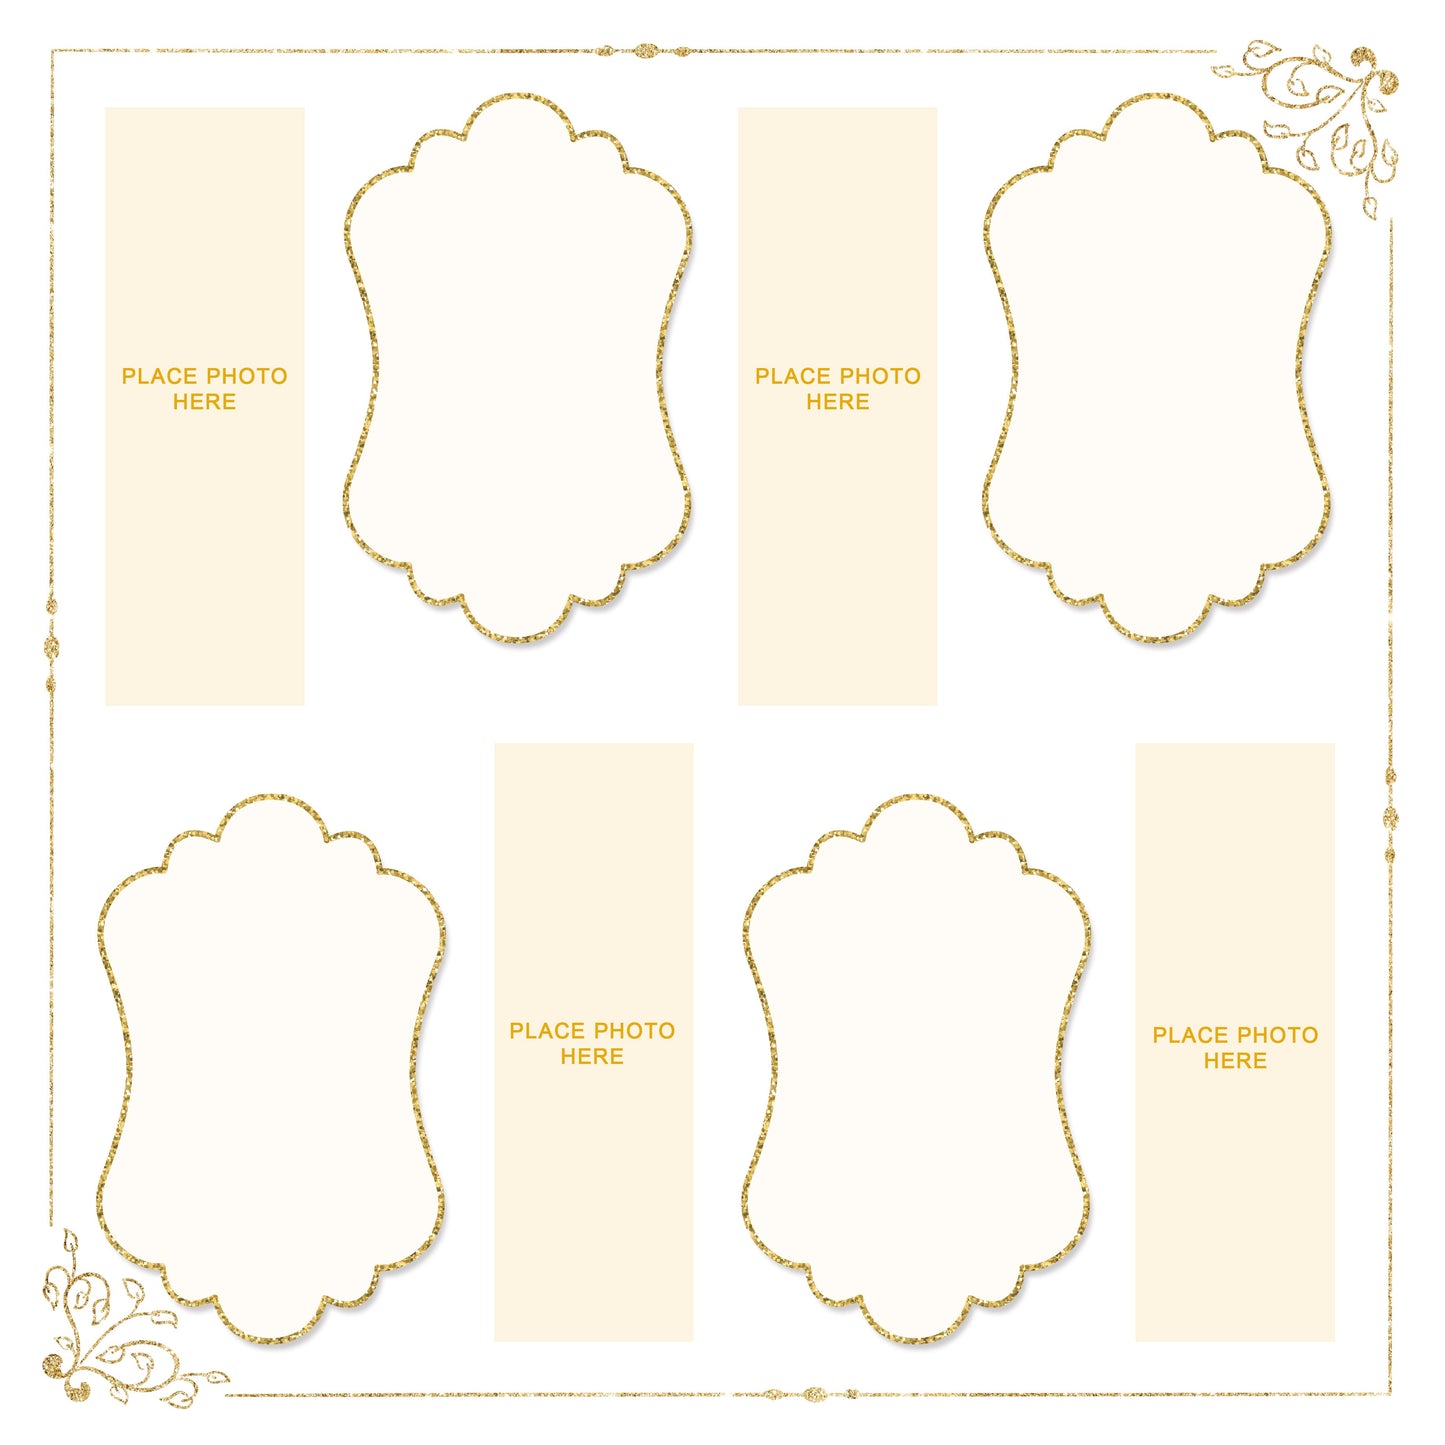 Pre-order 100 sheets - Ivory and Gold Design Scrapbook Pages 2x6